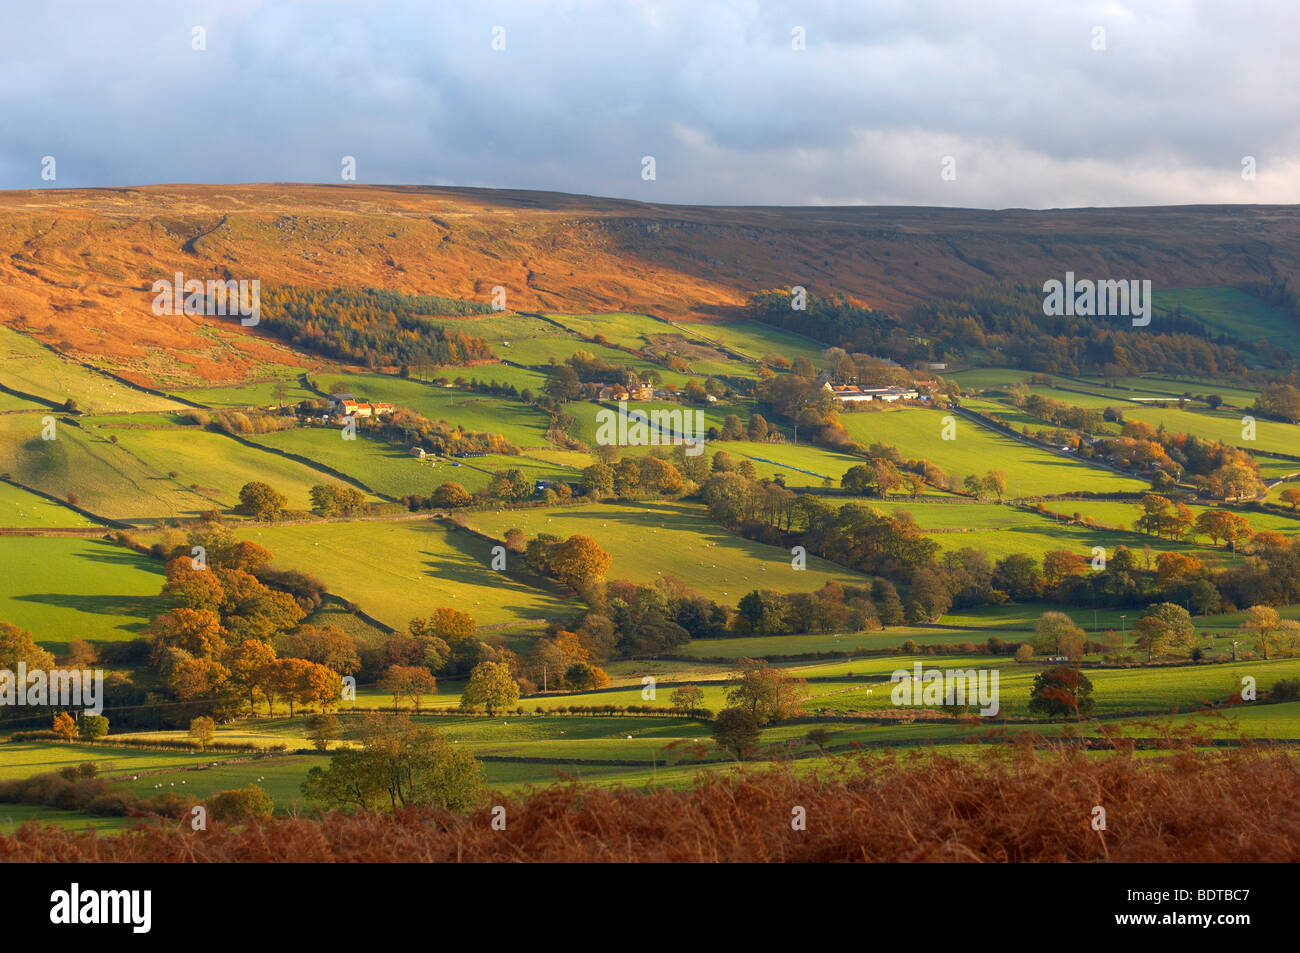 Danby Dale looking towards Botton village, North Yorkshire Moors National Park, England. Stock Photo